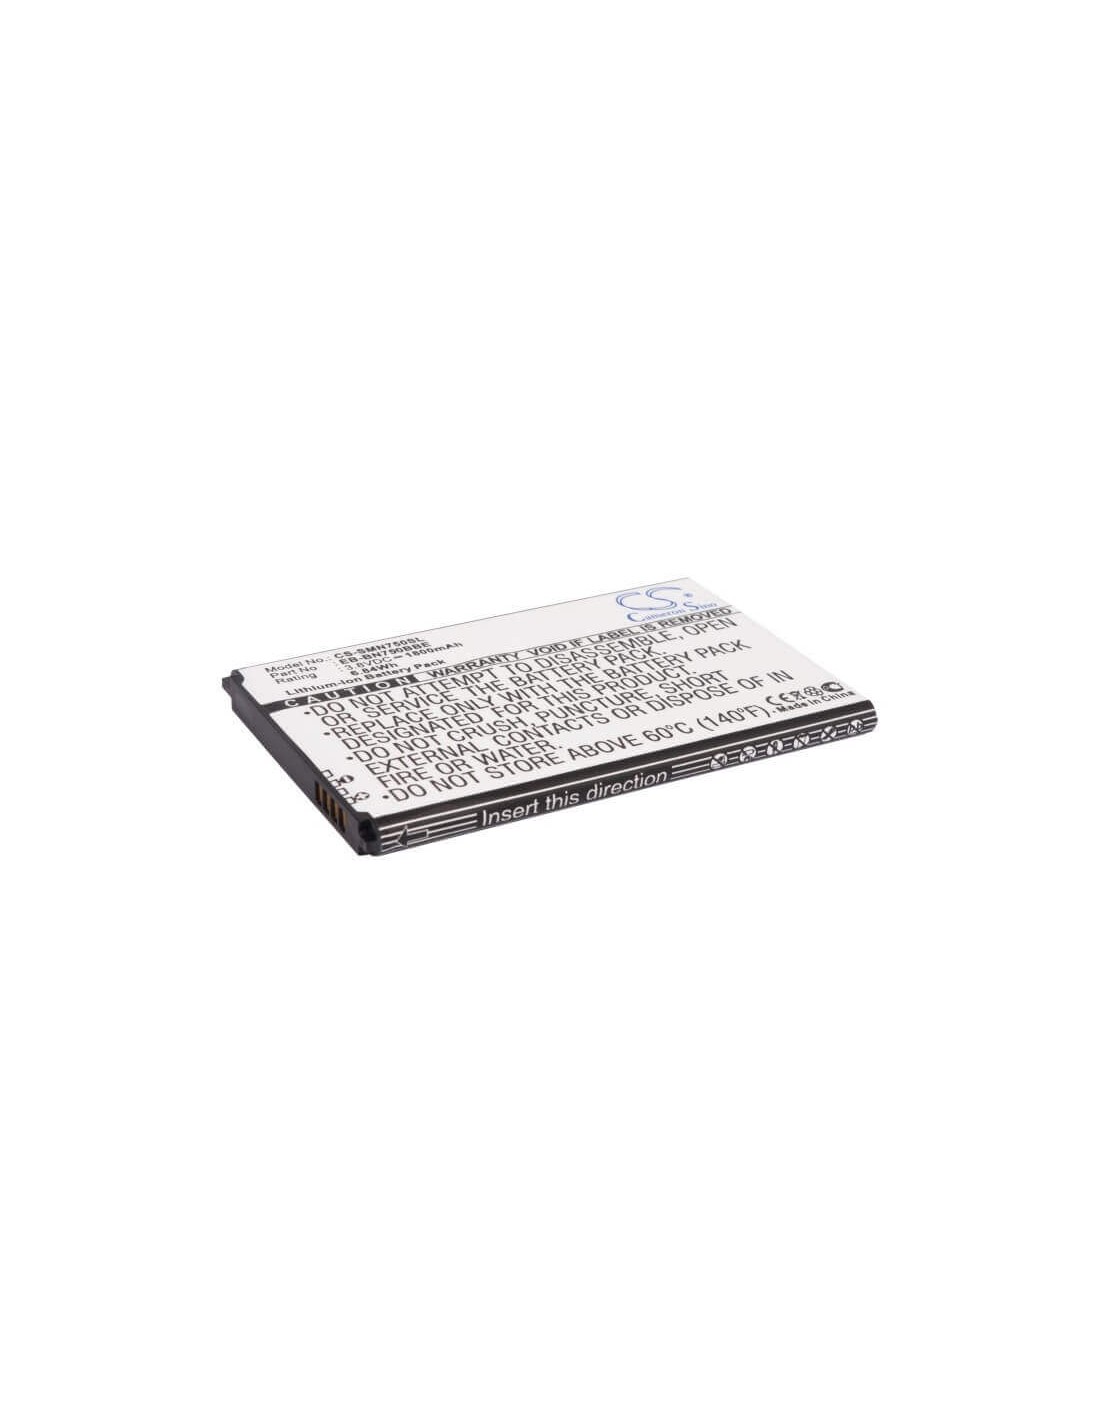 Battery for Samsung Galaxy Note 3 Neo, Galaxy Note 3 Mini, SM-N7505 3.8V, 1800mAh - 6.84Wh